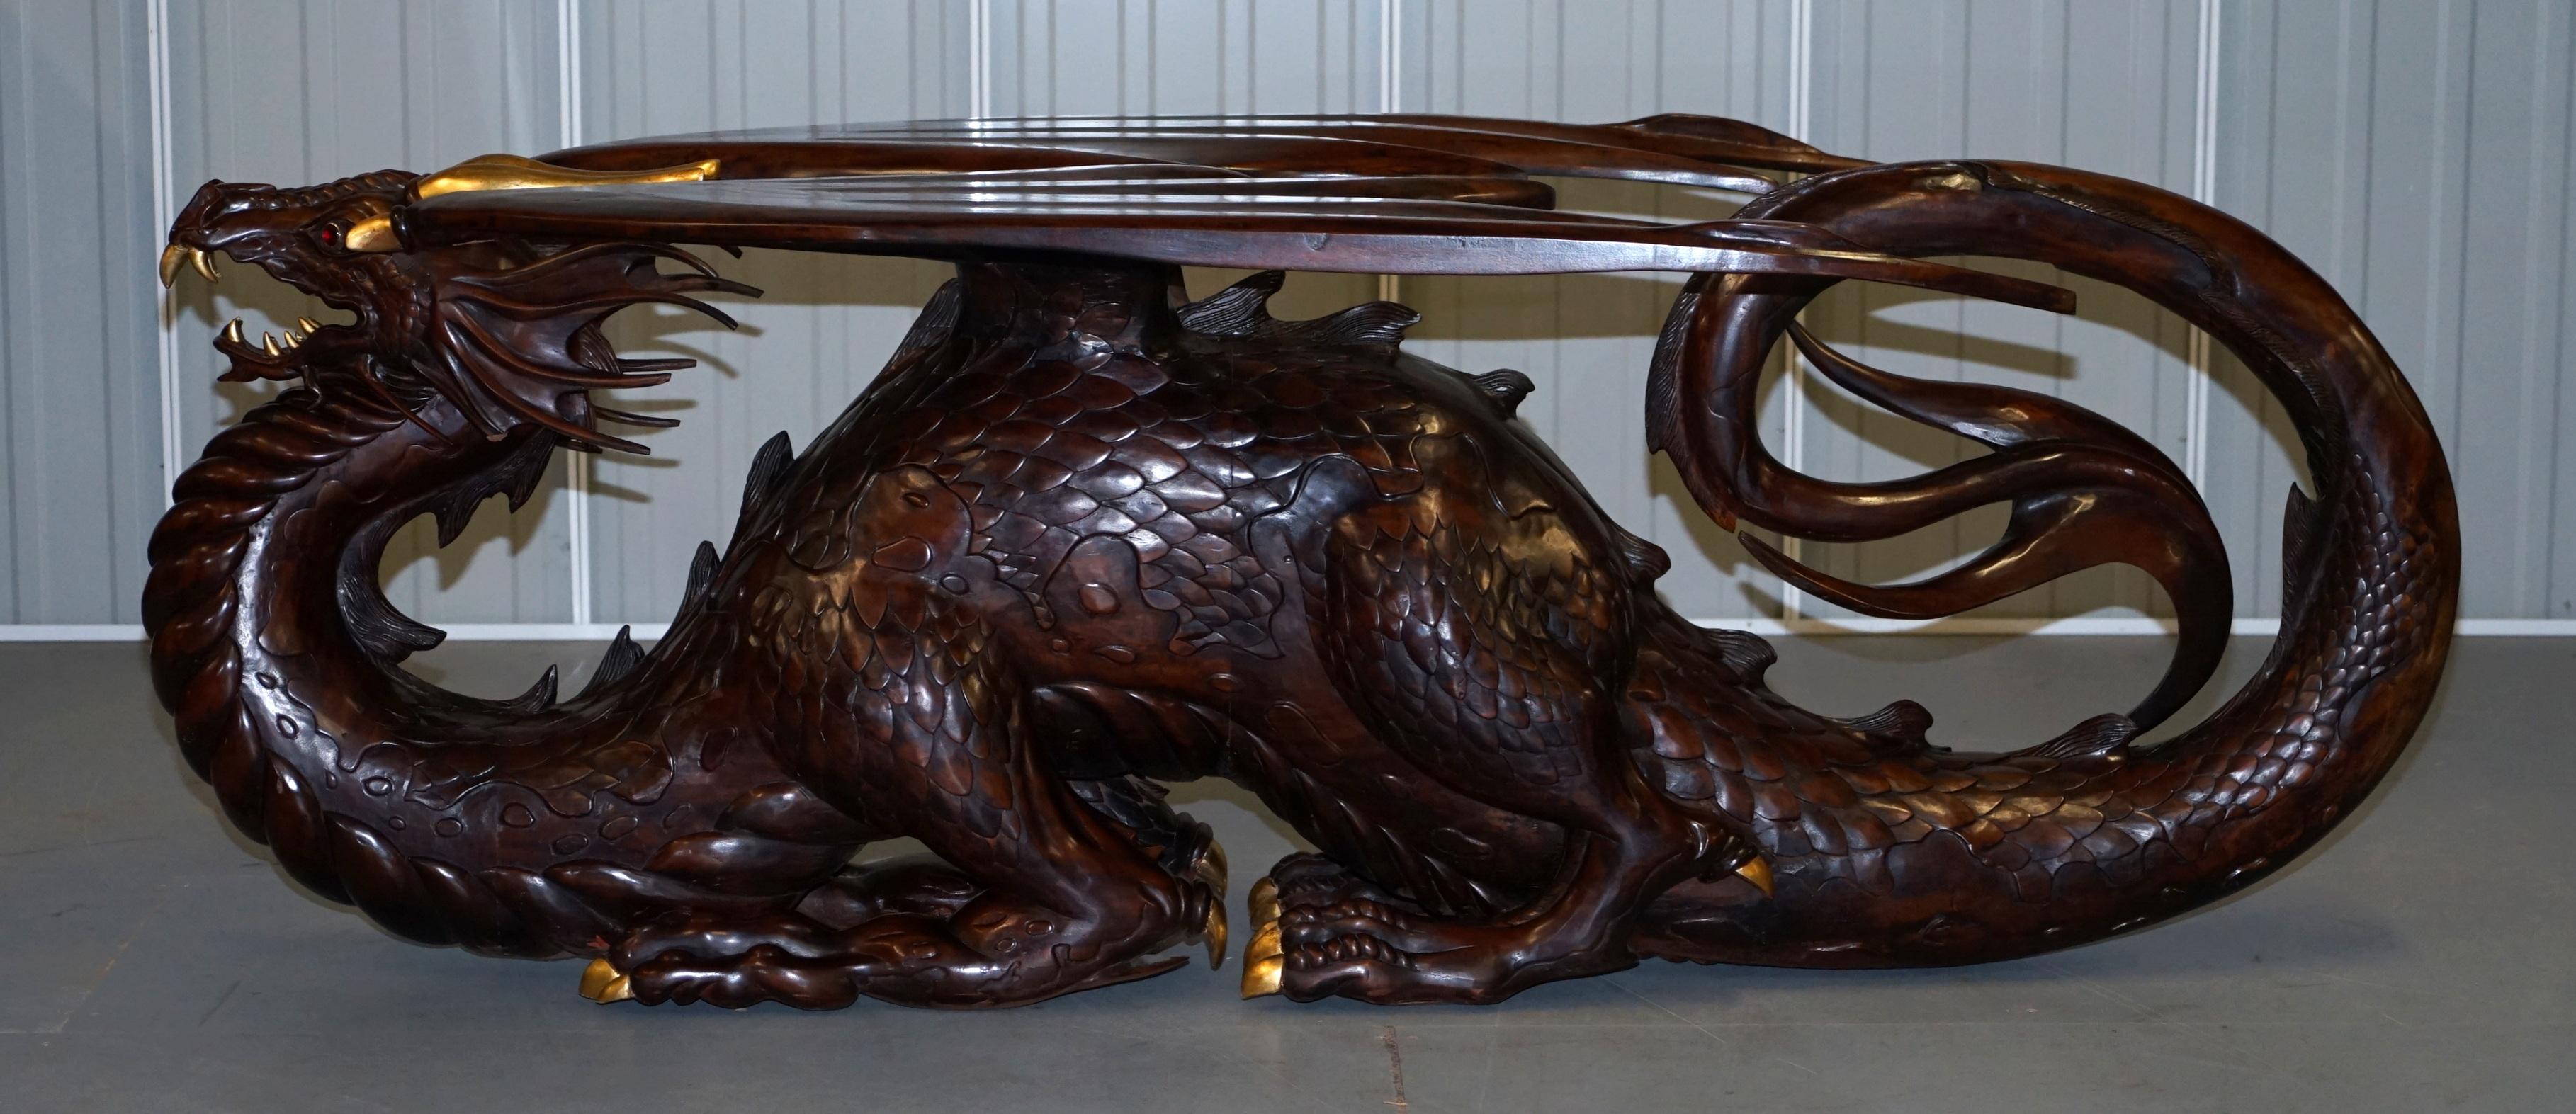 dragon dining table